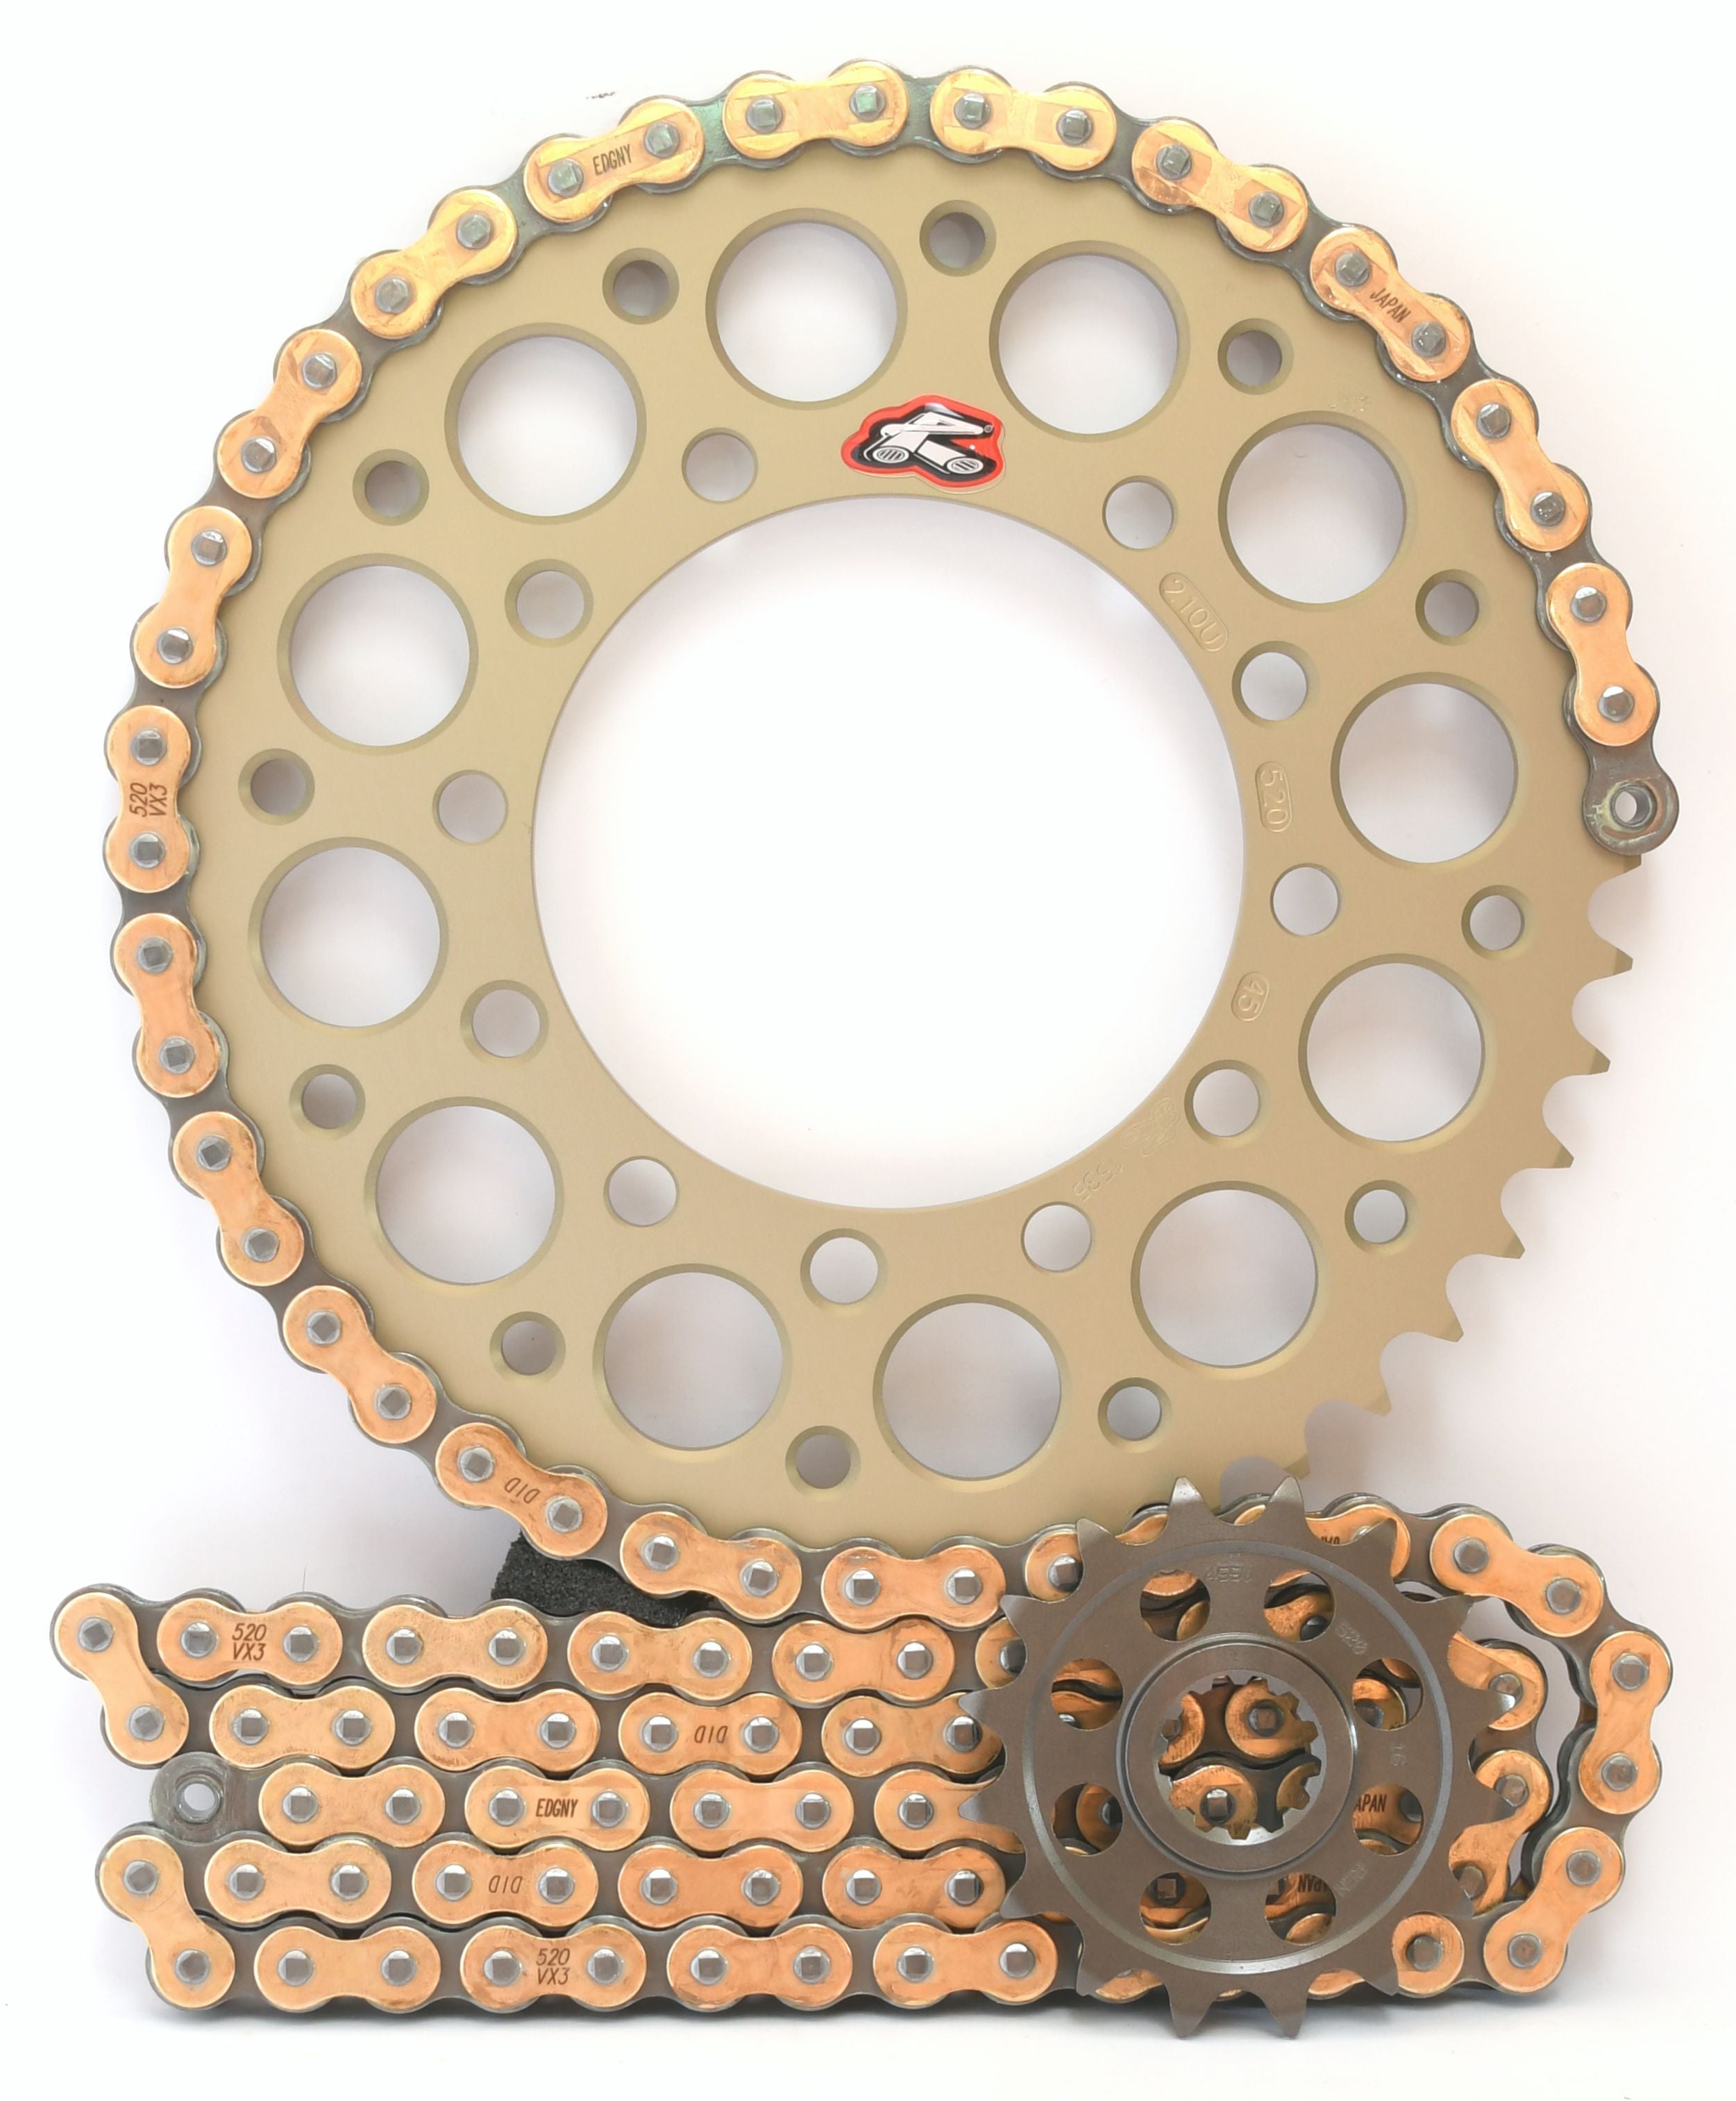 Renthal Ultralight and DID Chain & Sprocket Kit for Ducati Panigale 899 2013-2015 - Standard Gearing